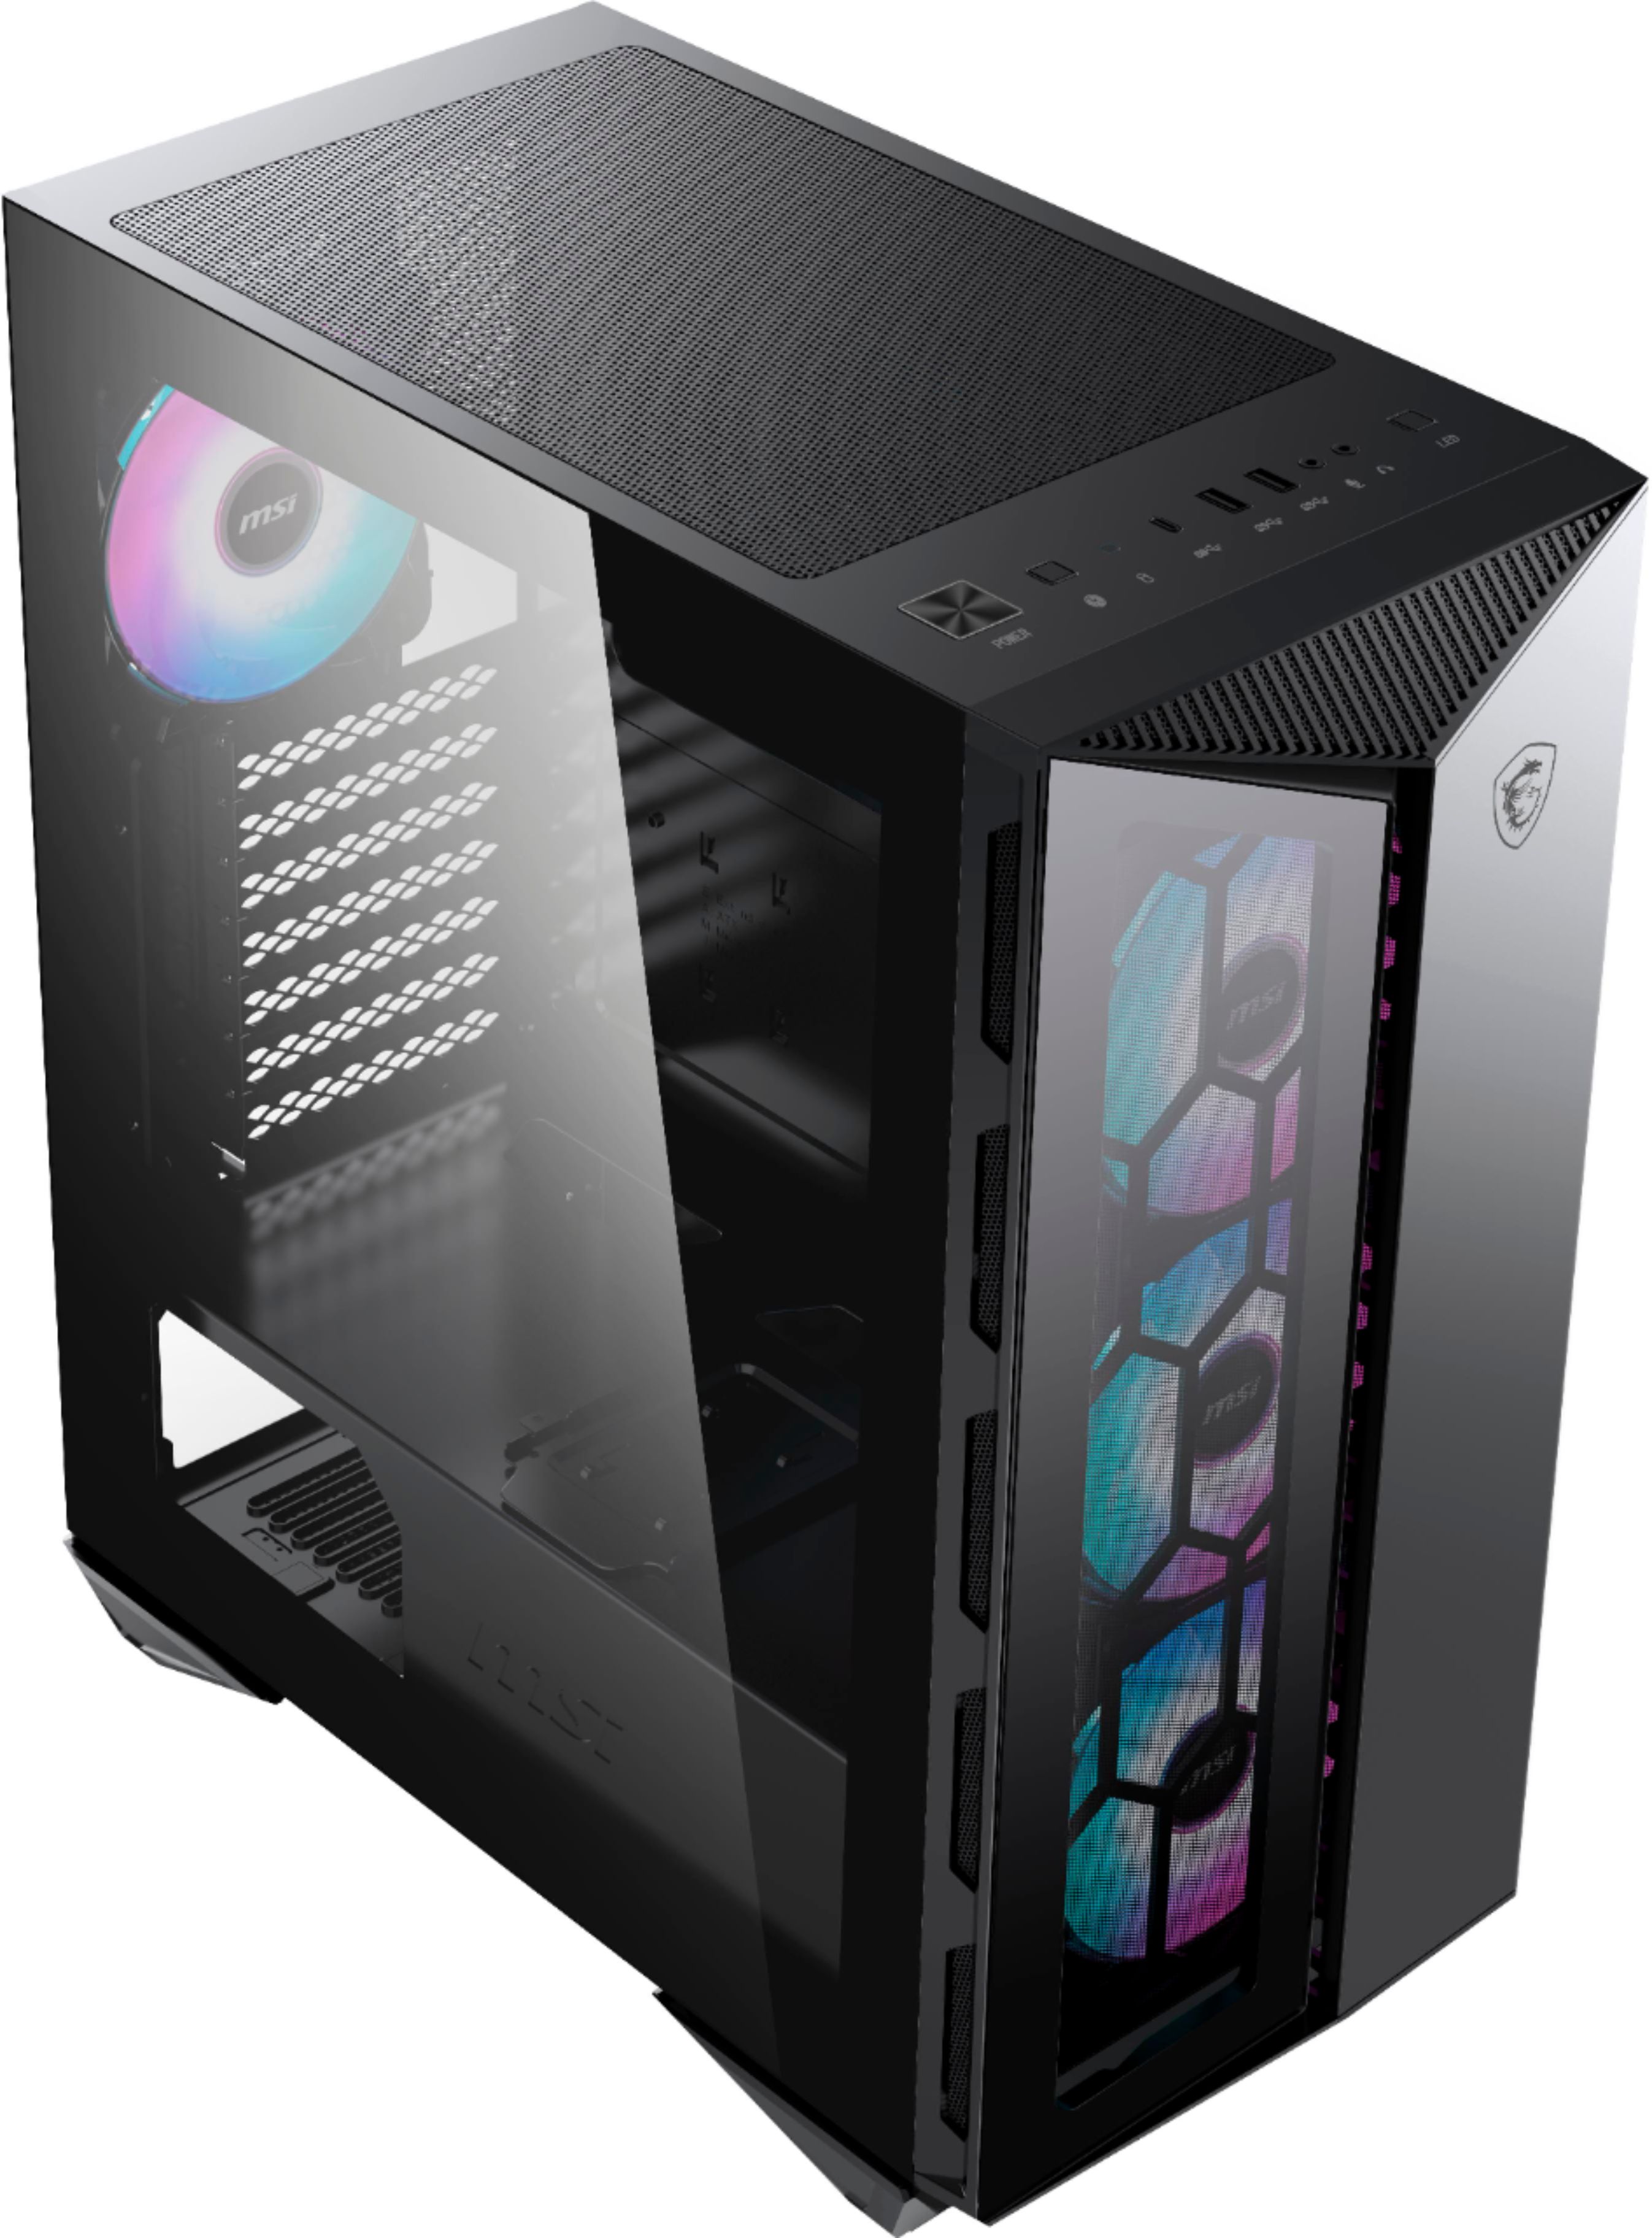 MSI MPG GUNGNIR 110R - Premium Mid-Tower Gaming PC Case - Tempered Glass  Side Panel - 4 x ARGB 120mm Fans - Liquid Cooling Support up to 360mm